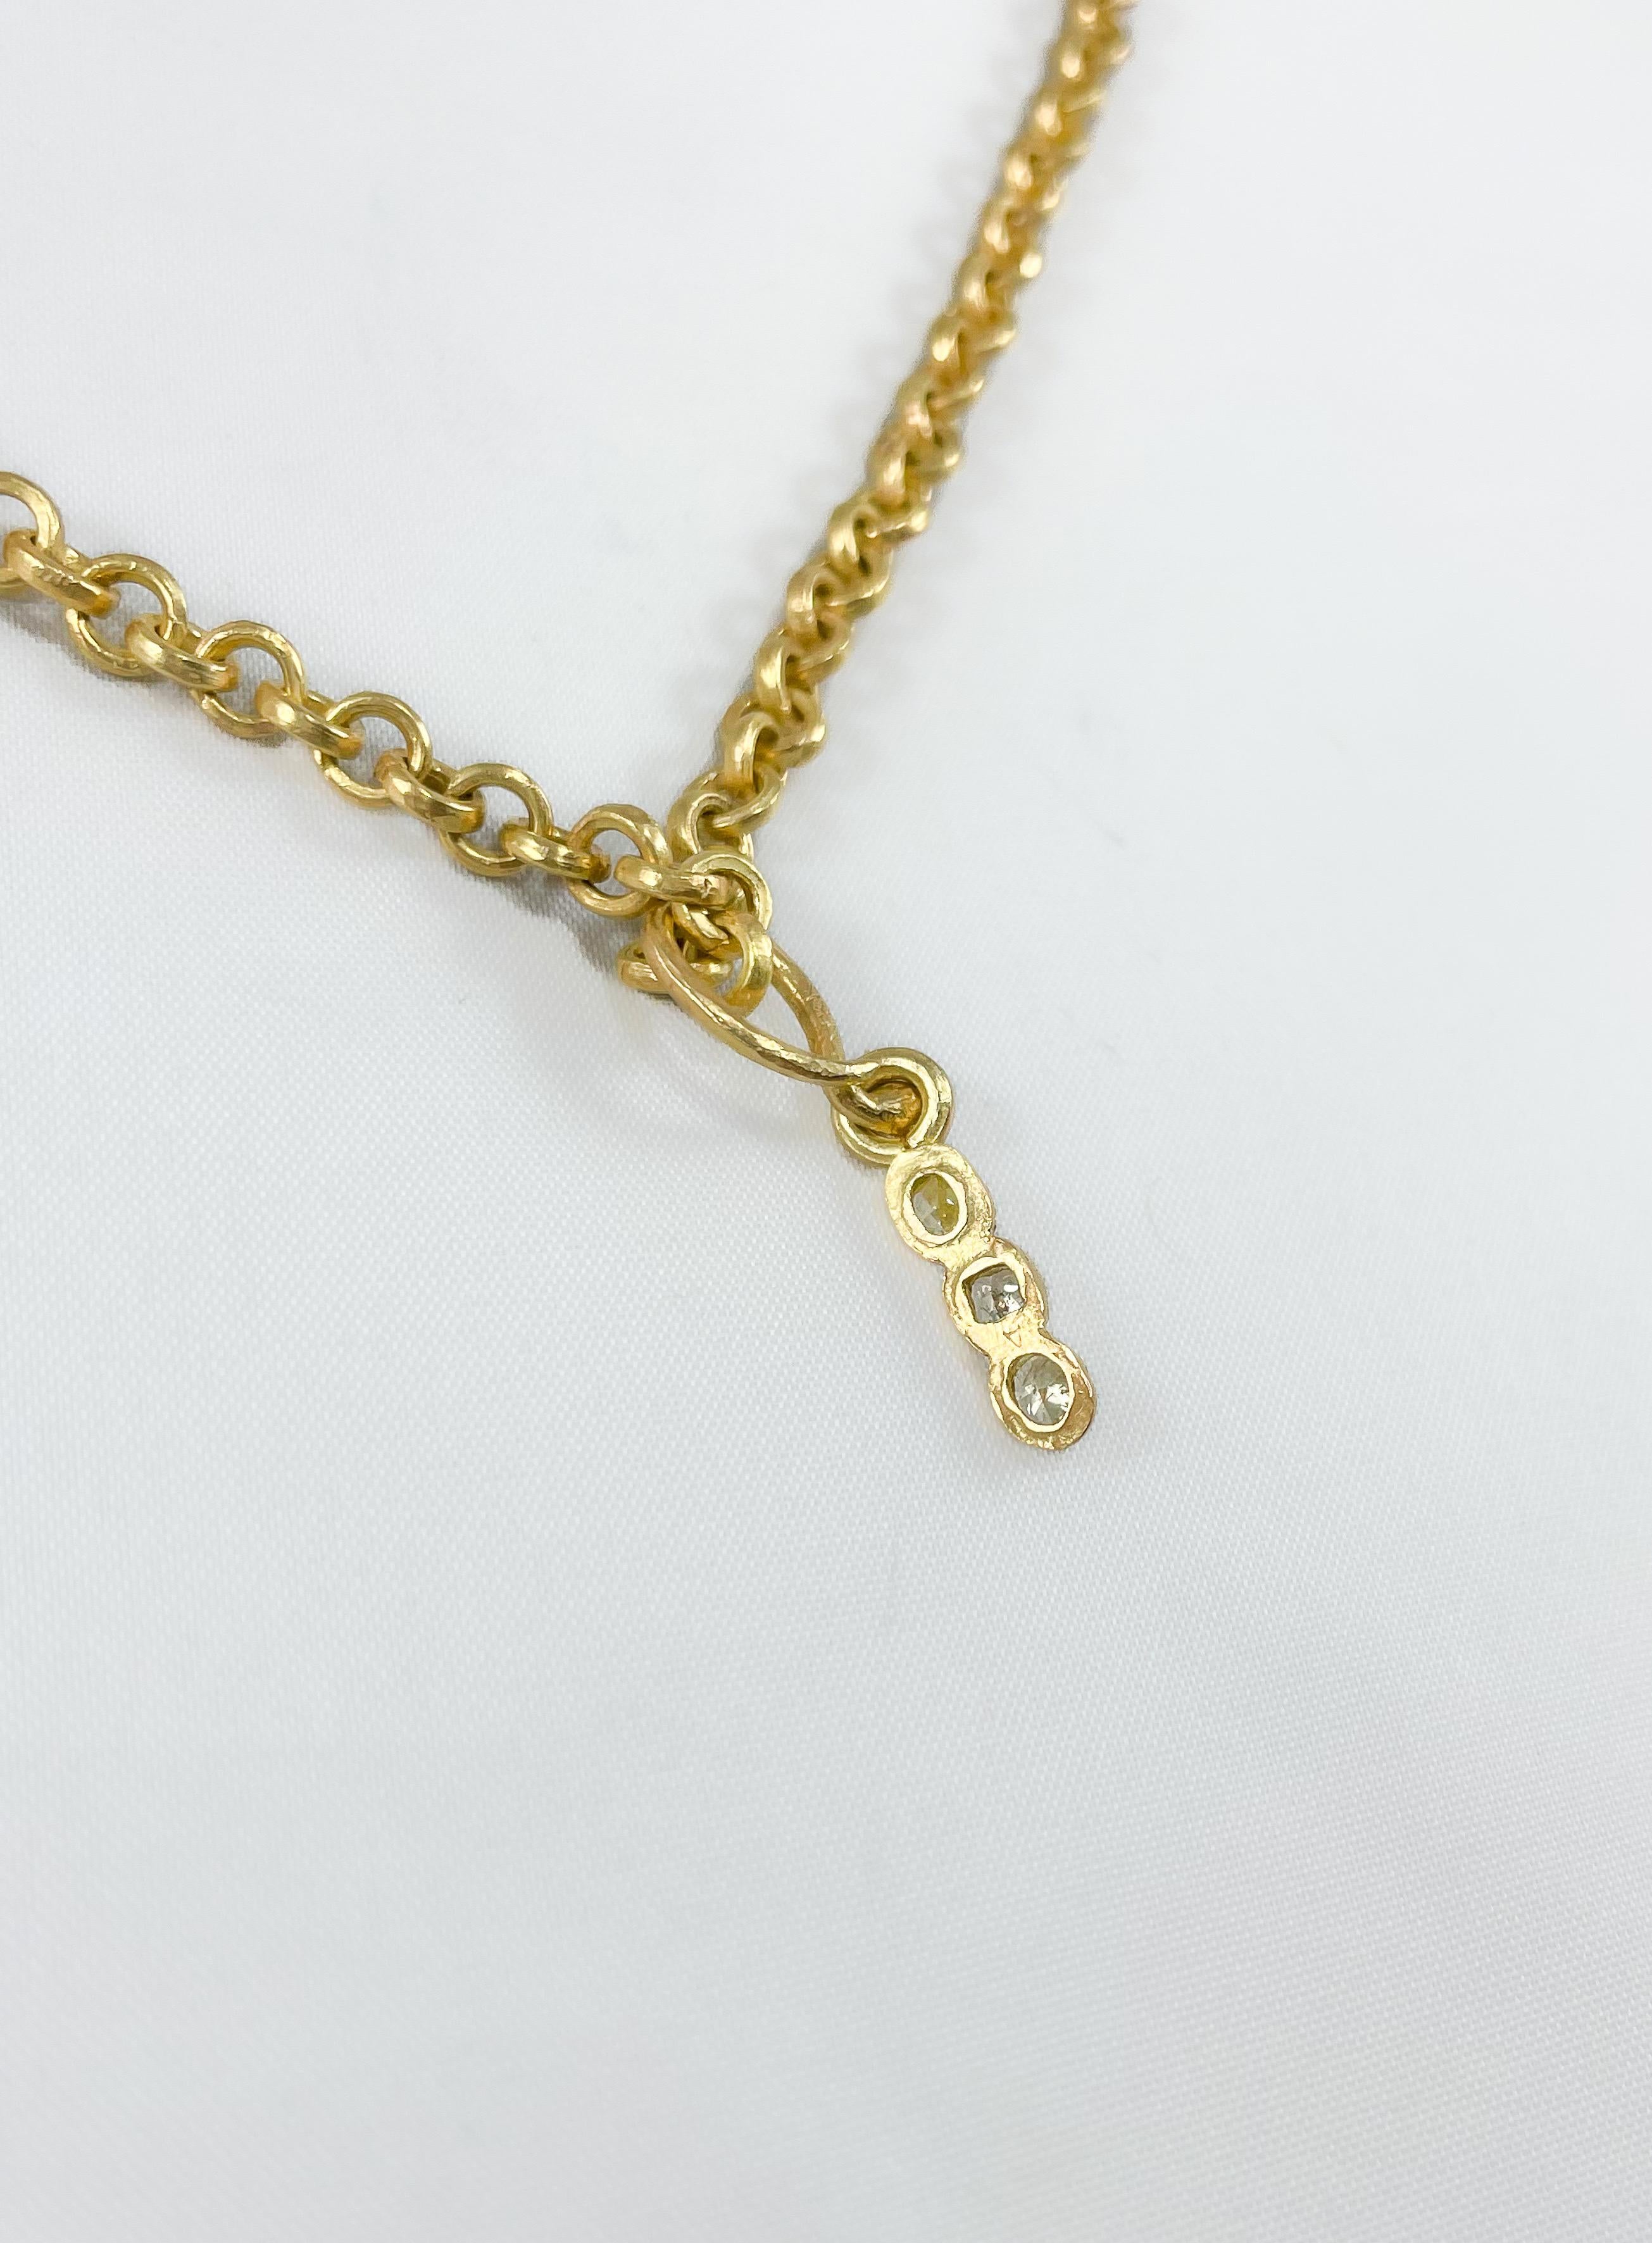 17mm Cream Pearl on 18K Gold Chain Necklace Diamond Enhancer and Toggle Clasp For Sale 4